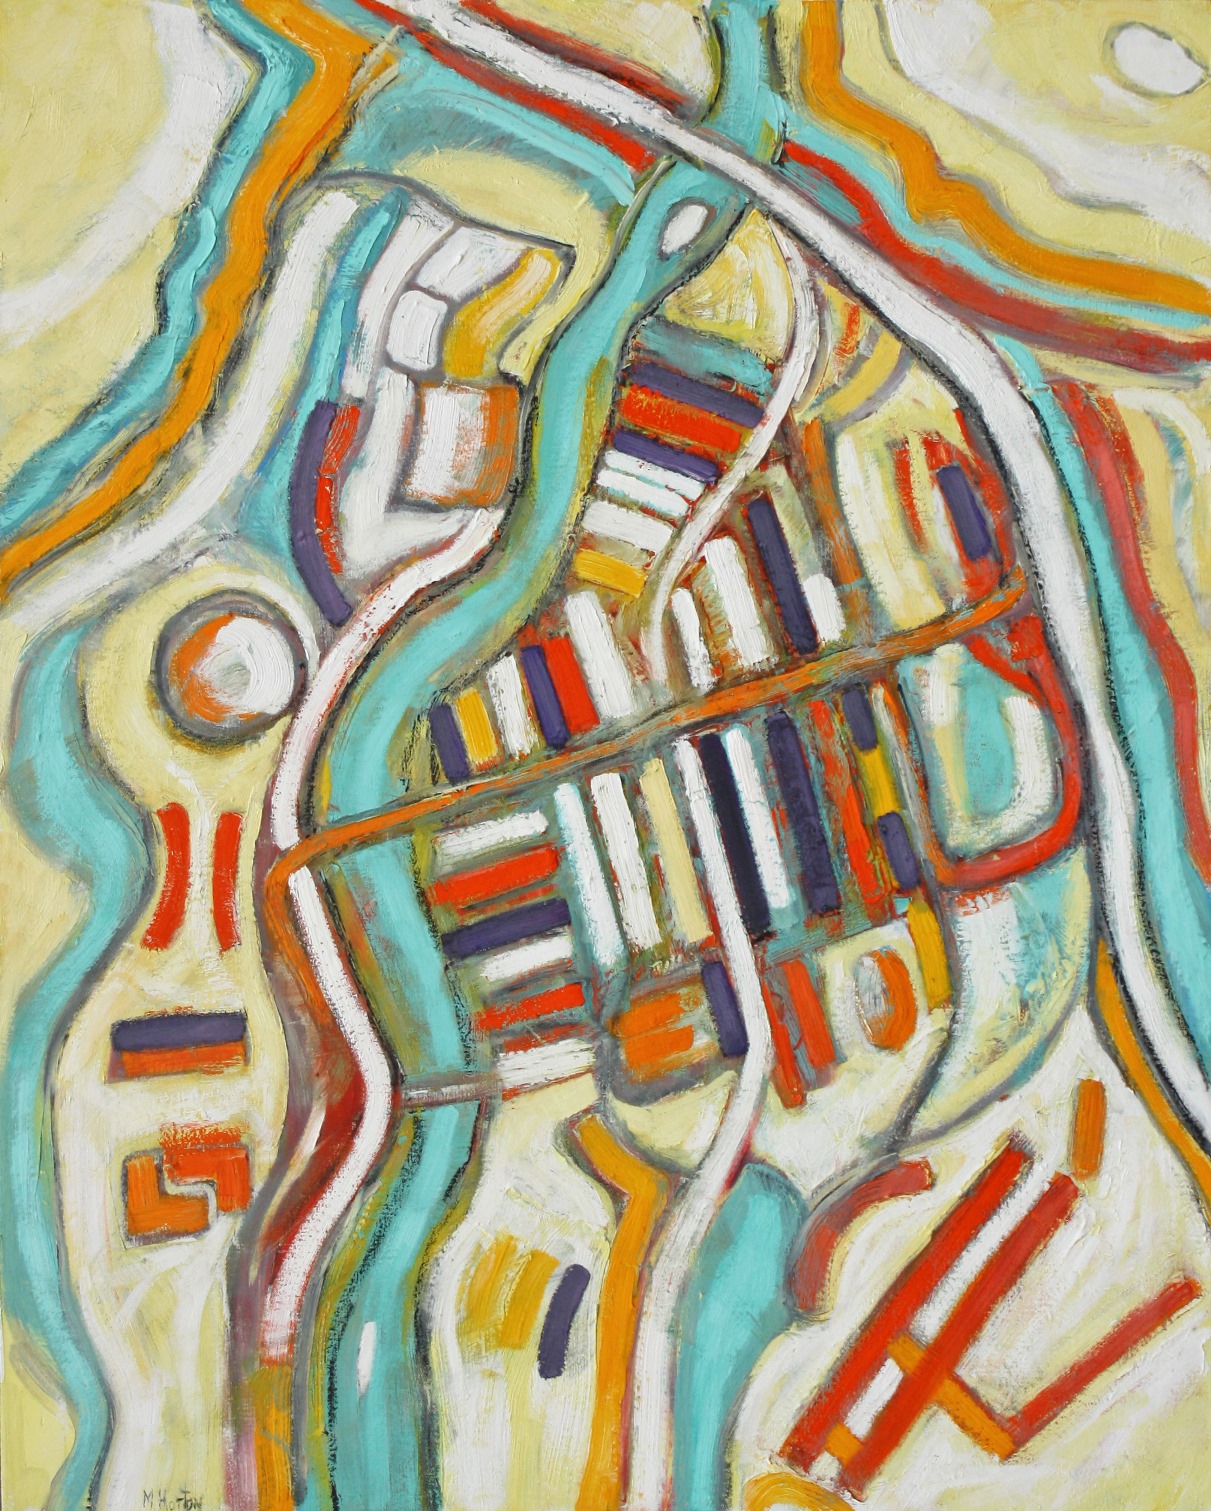 City Map in Yellow, Orange and Red 50"x40"